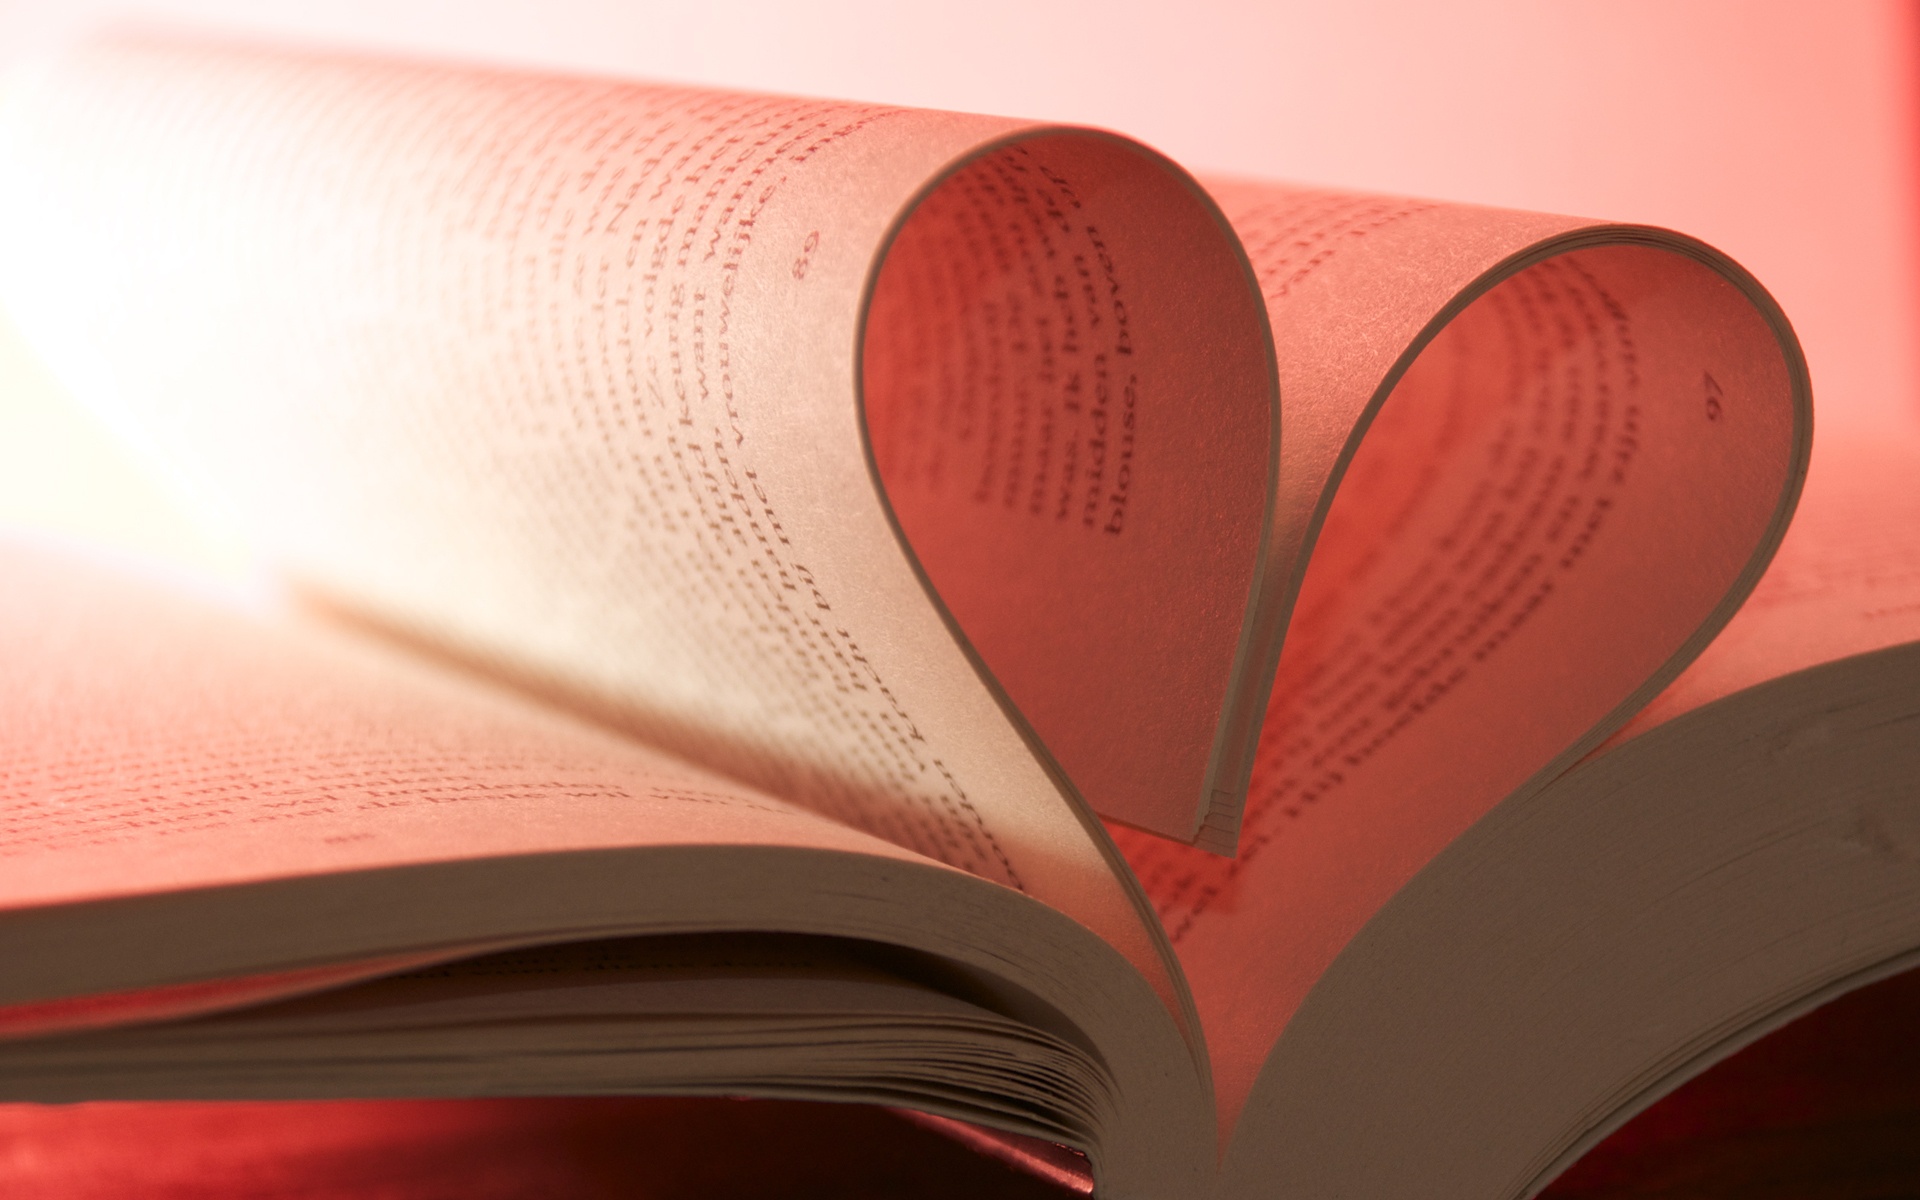 Super Book Pages Heart